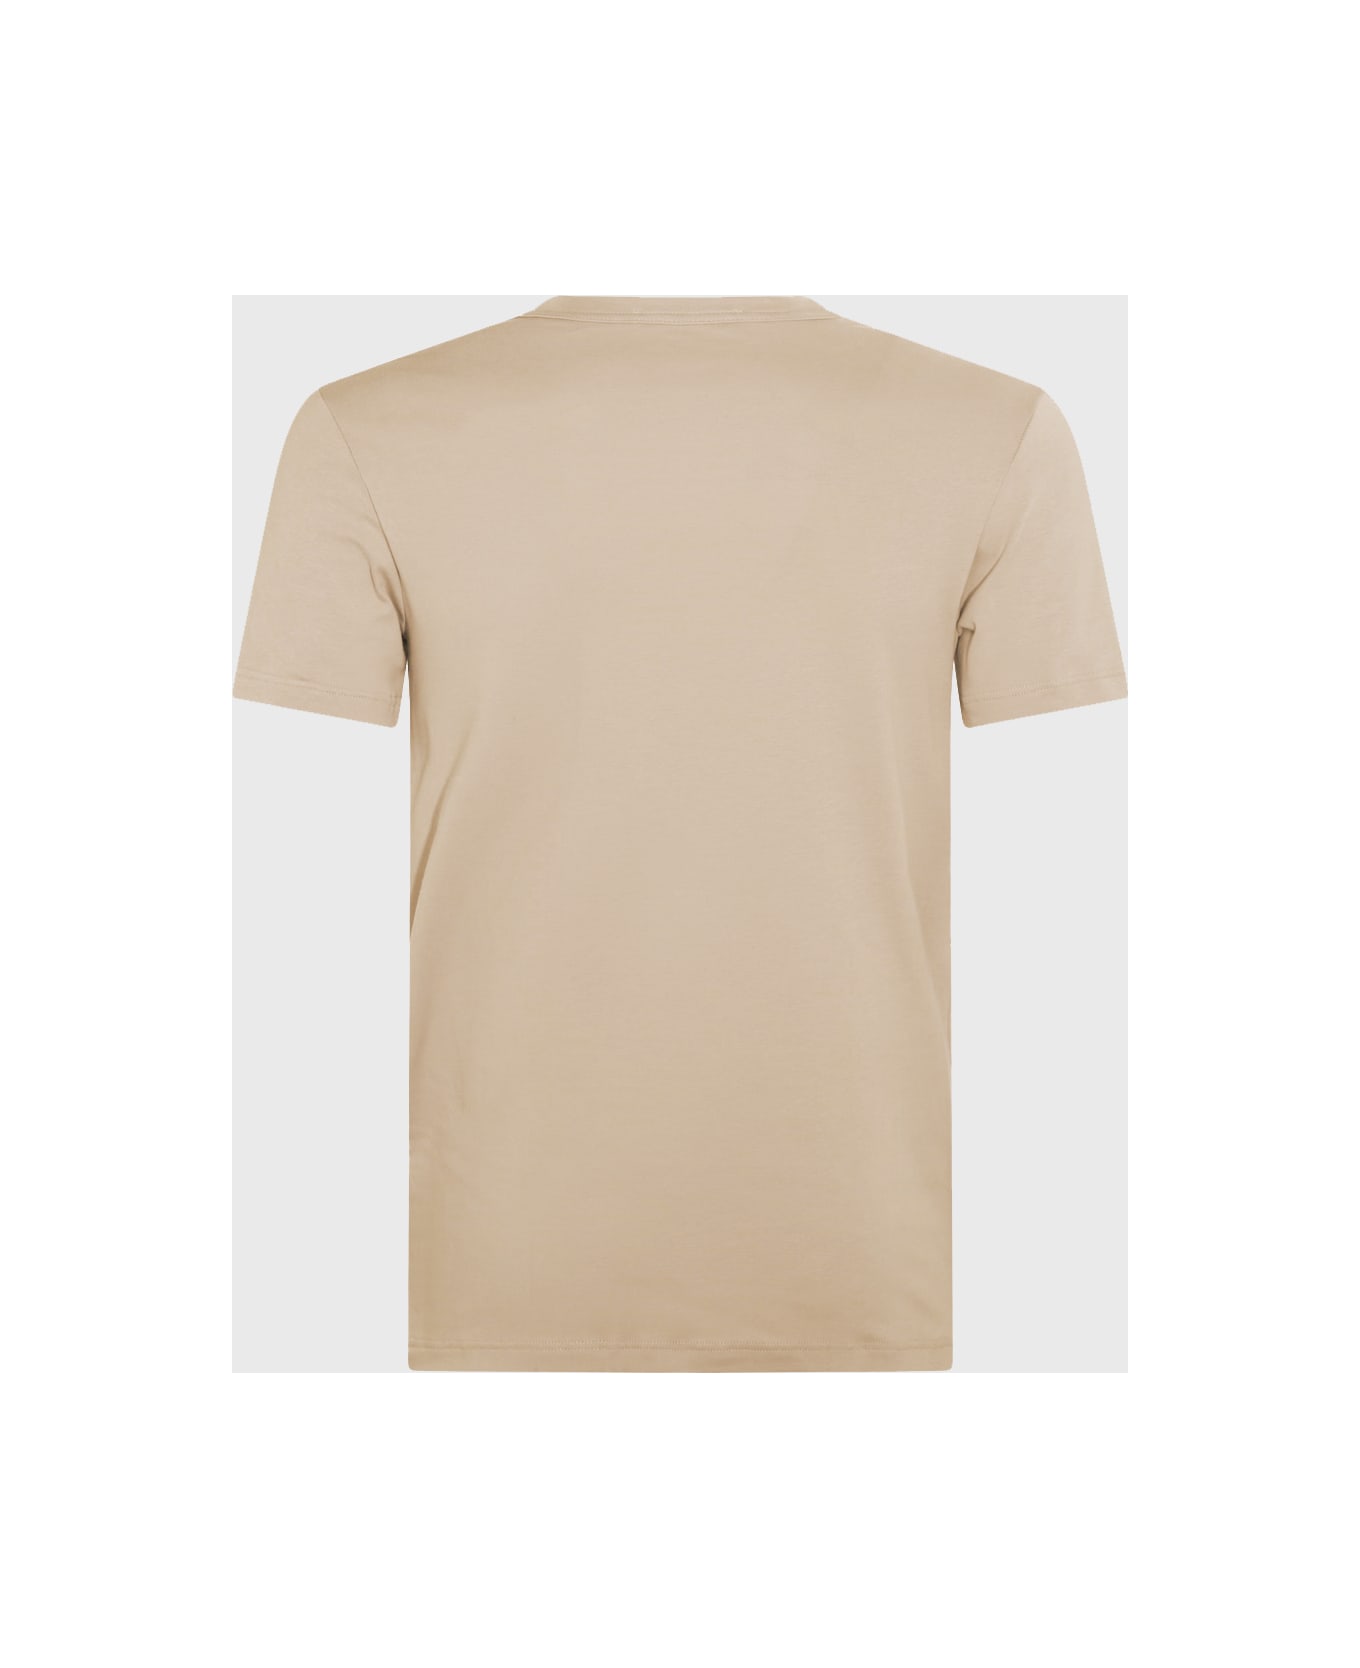 Tom Ford Beige Cotton Blend T-shirt - NUDE 1 シャツ